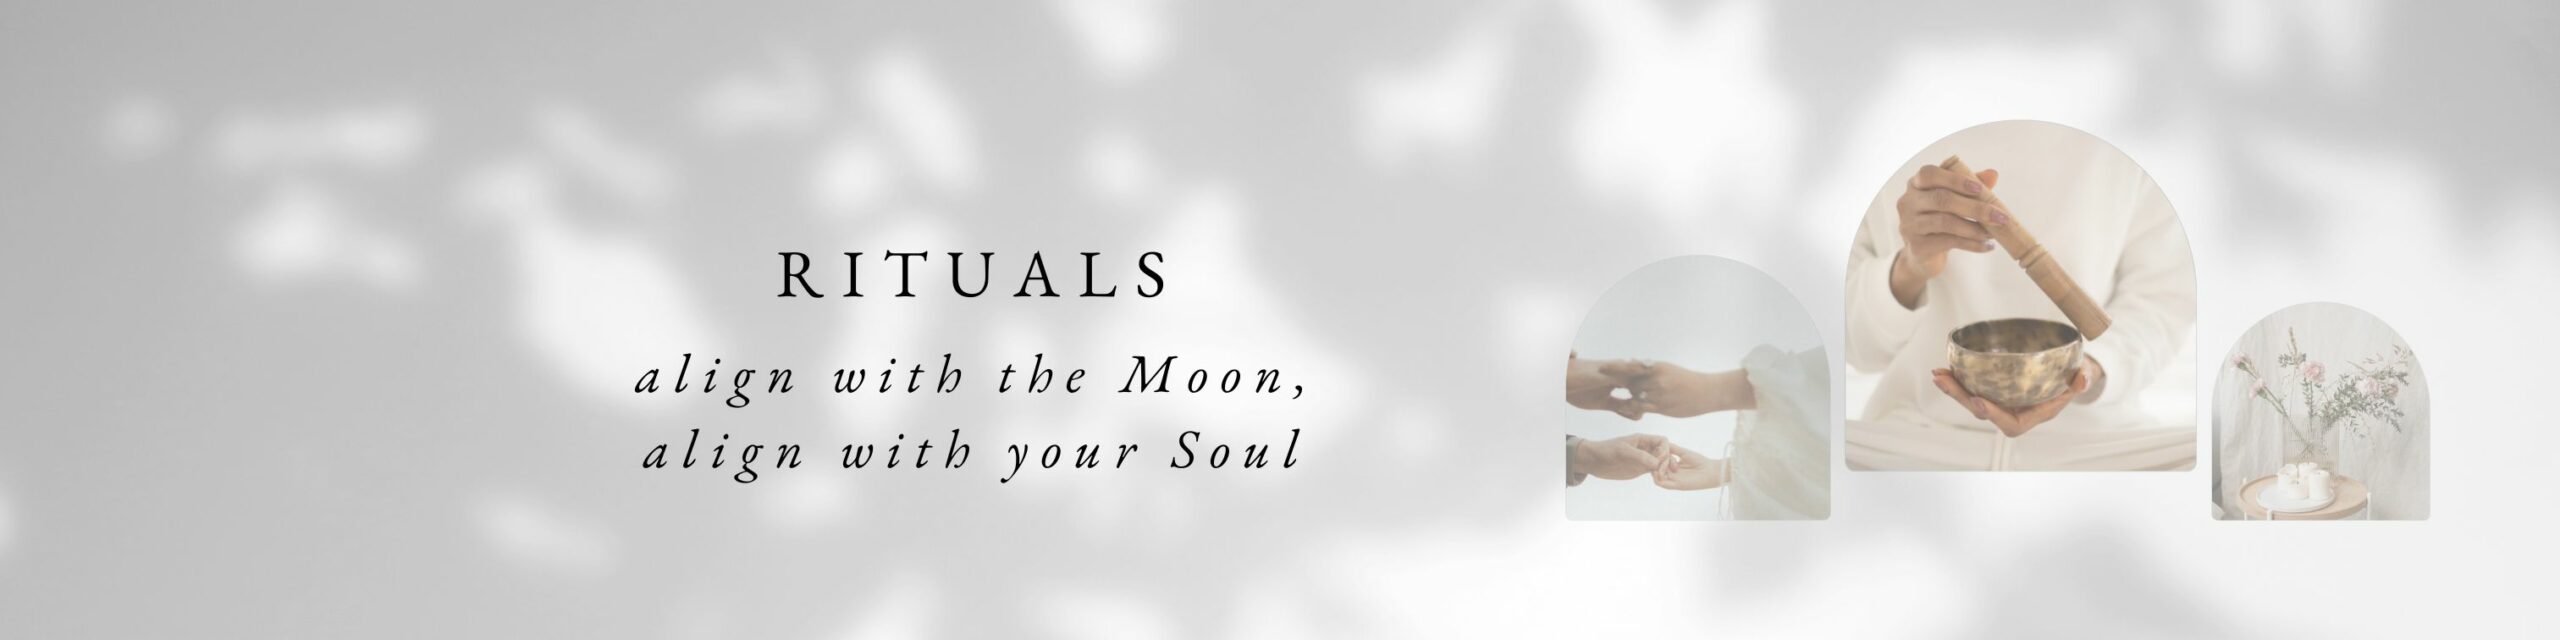 Ritual Home Page Banner